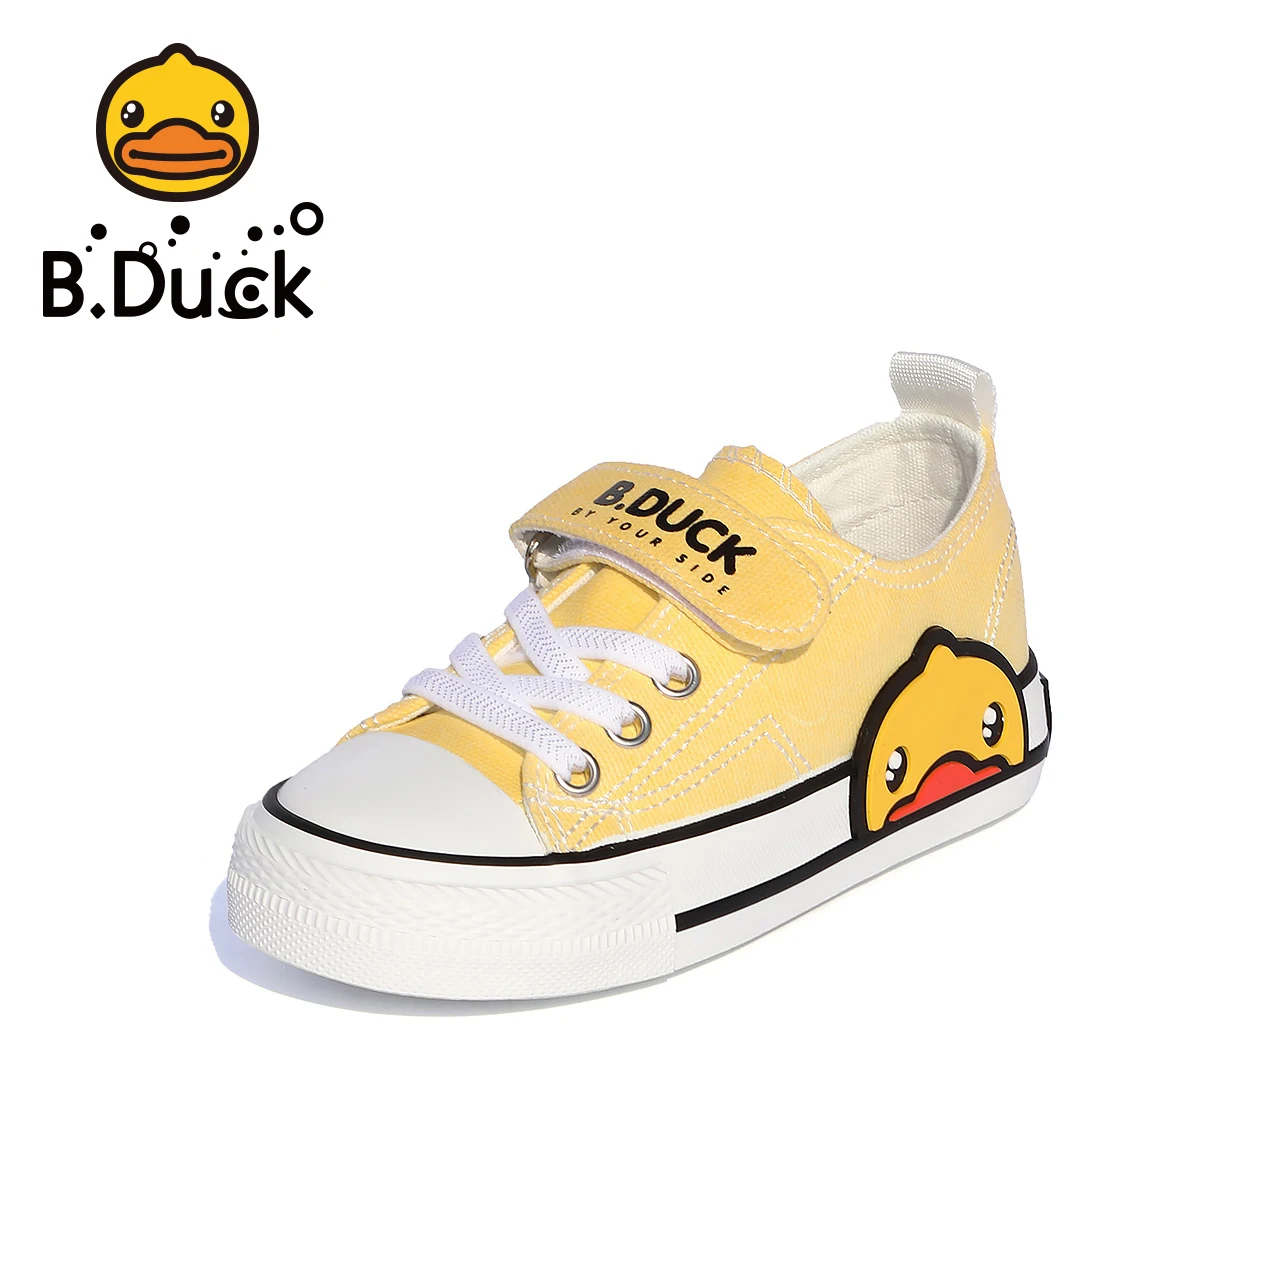 

Wholesale B.DUCK Cheap Top Quality Children Flat Vulcanized Canvas Lace Up Shoes for Kids with Hook, Yellow,blue